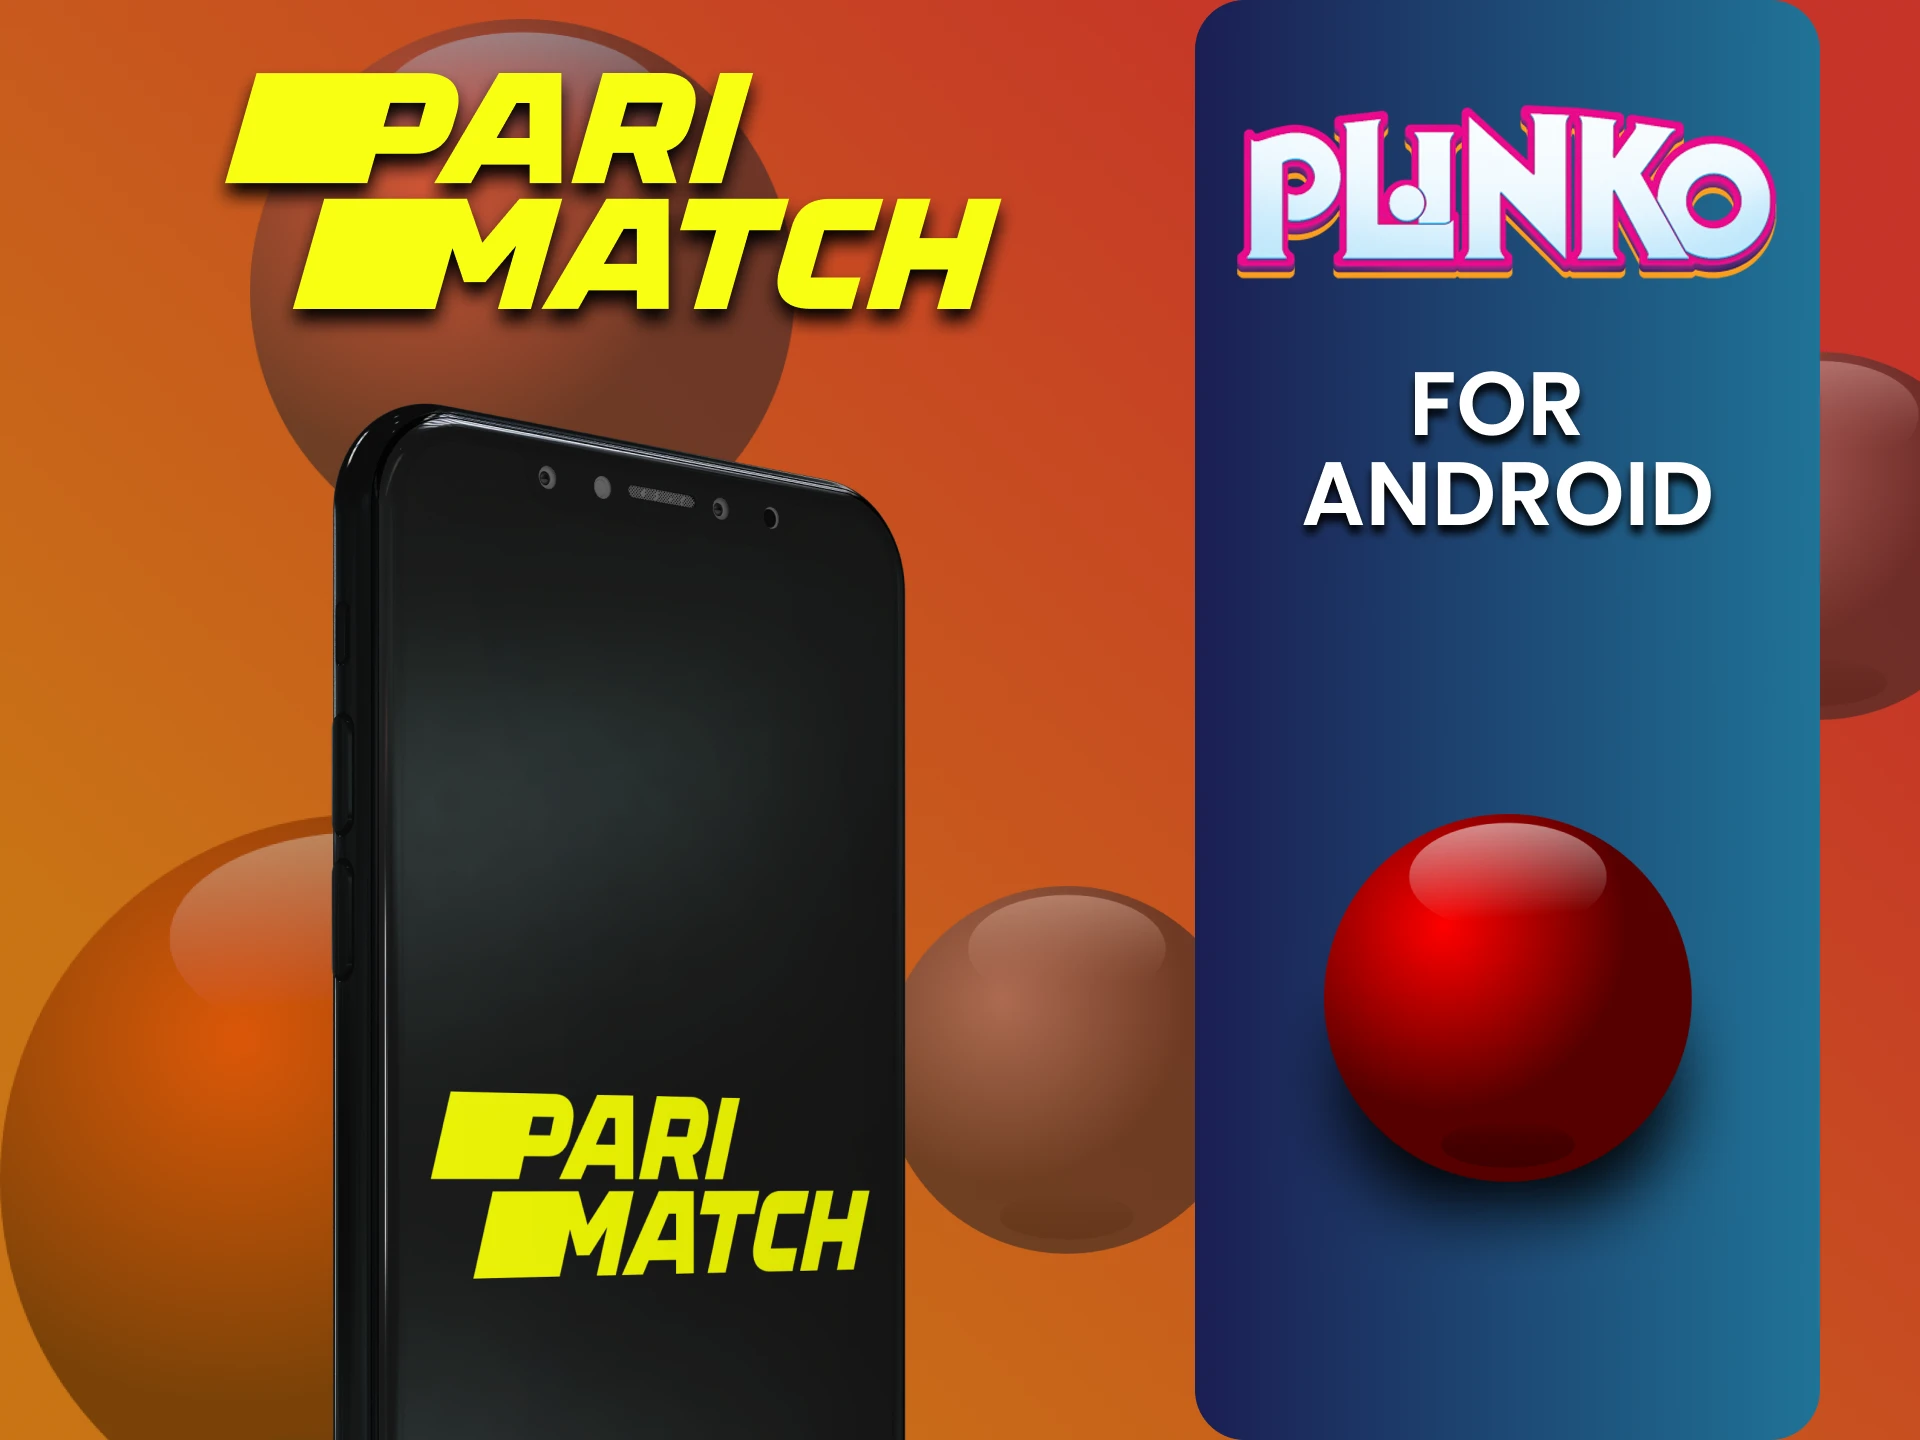 Install the Parimatch app on Android to play Plinko.